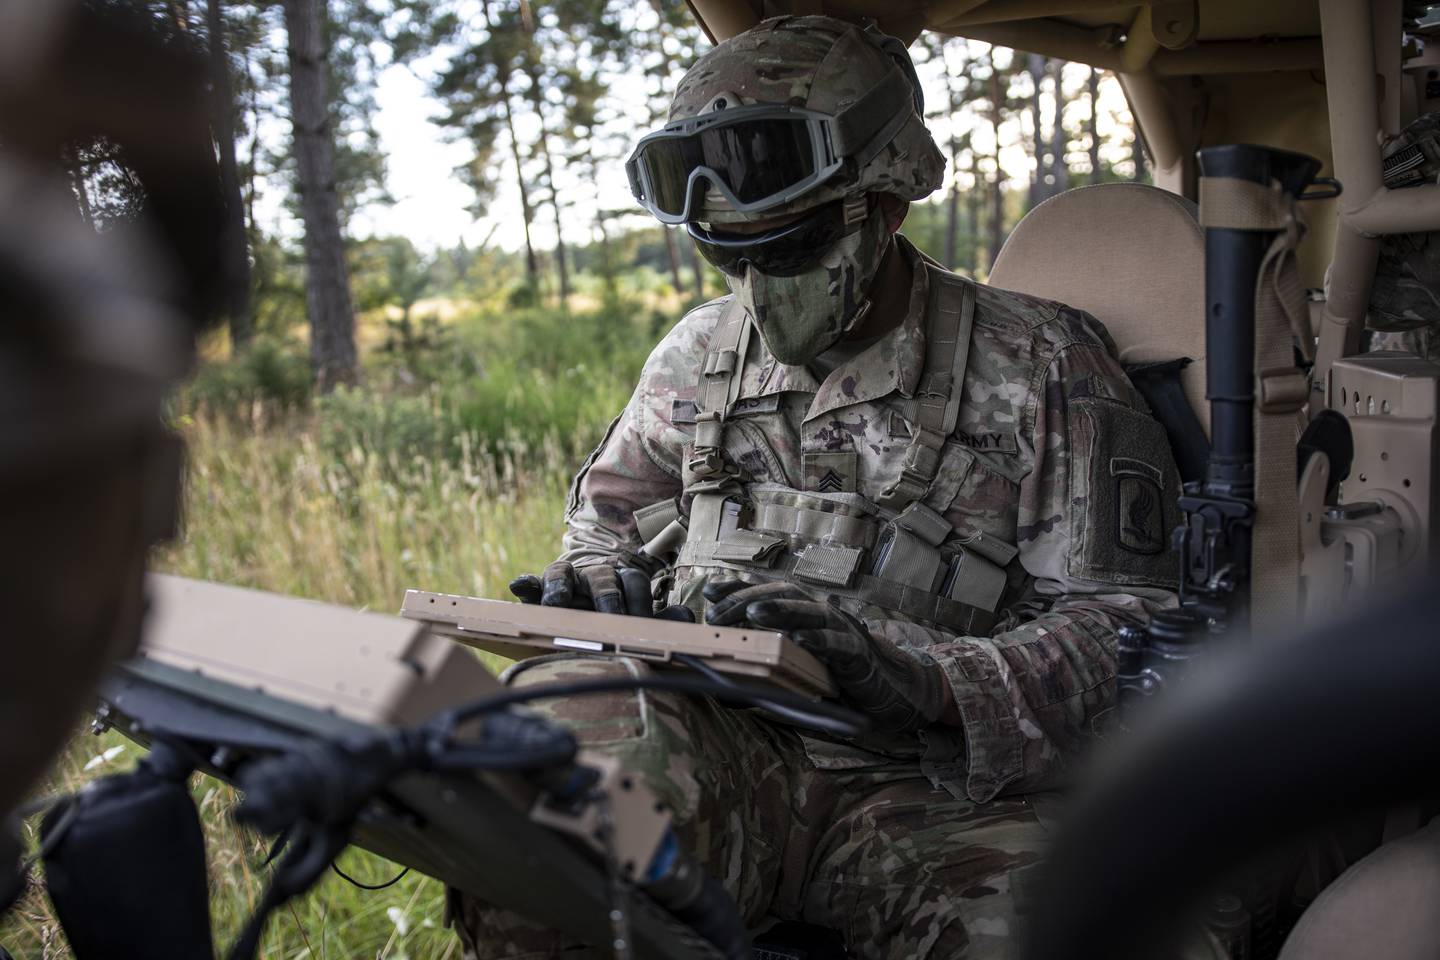 Sgt. Vargas, a U.S. Army paratrooper assigned to 54th Brigade Engineer Battalion, 173rd Airborne Brigade, uses electronic warfare equipment at Grafenwoehr Training Area, Germany, July 28, 2020.